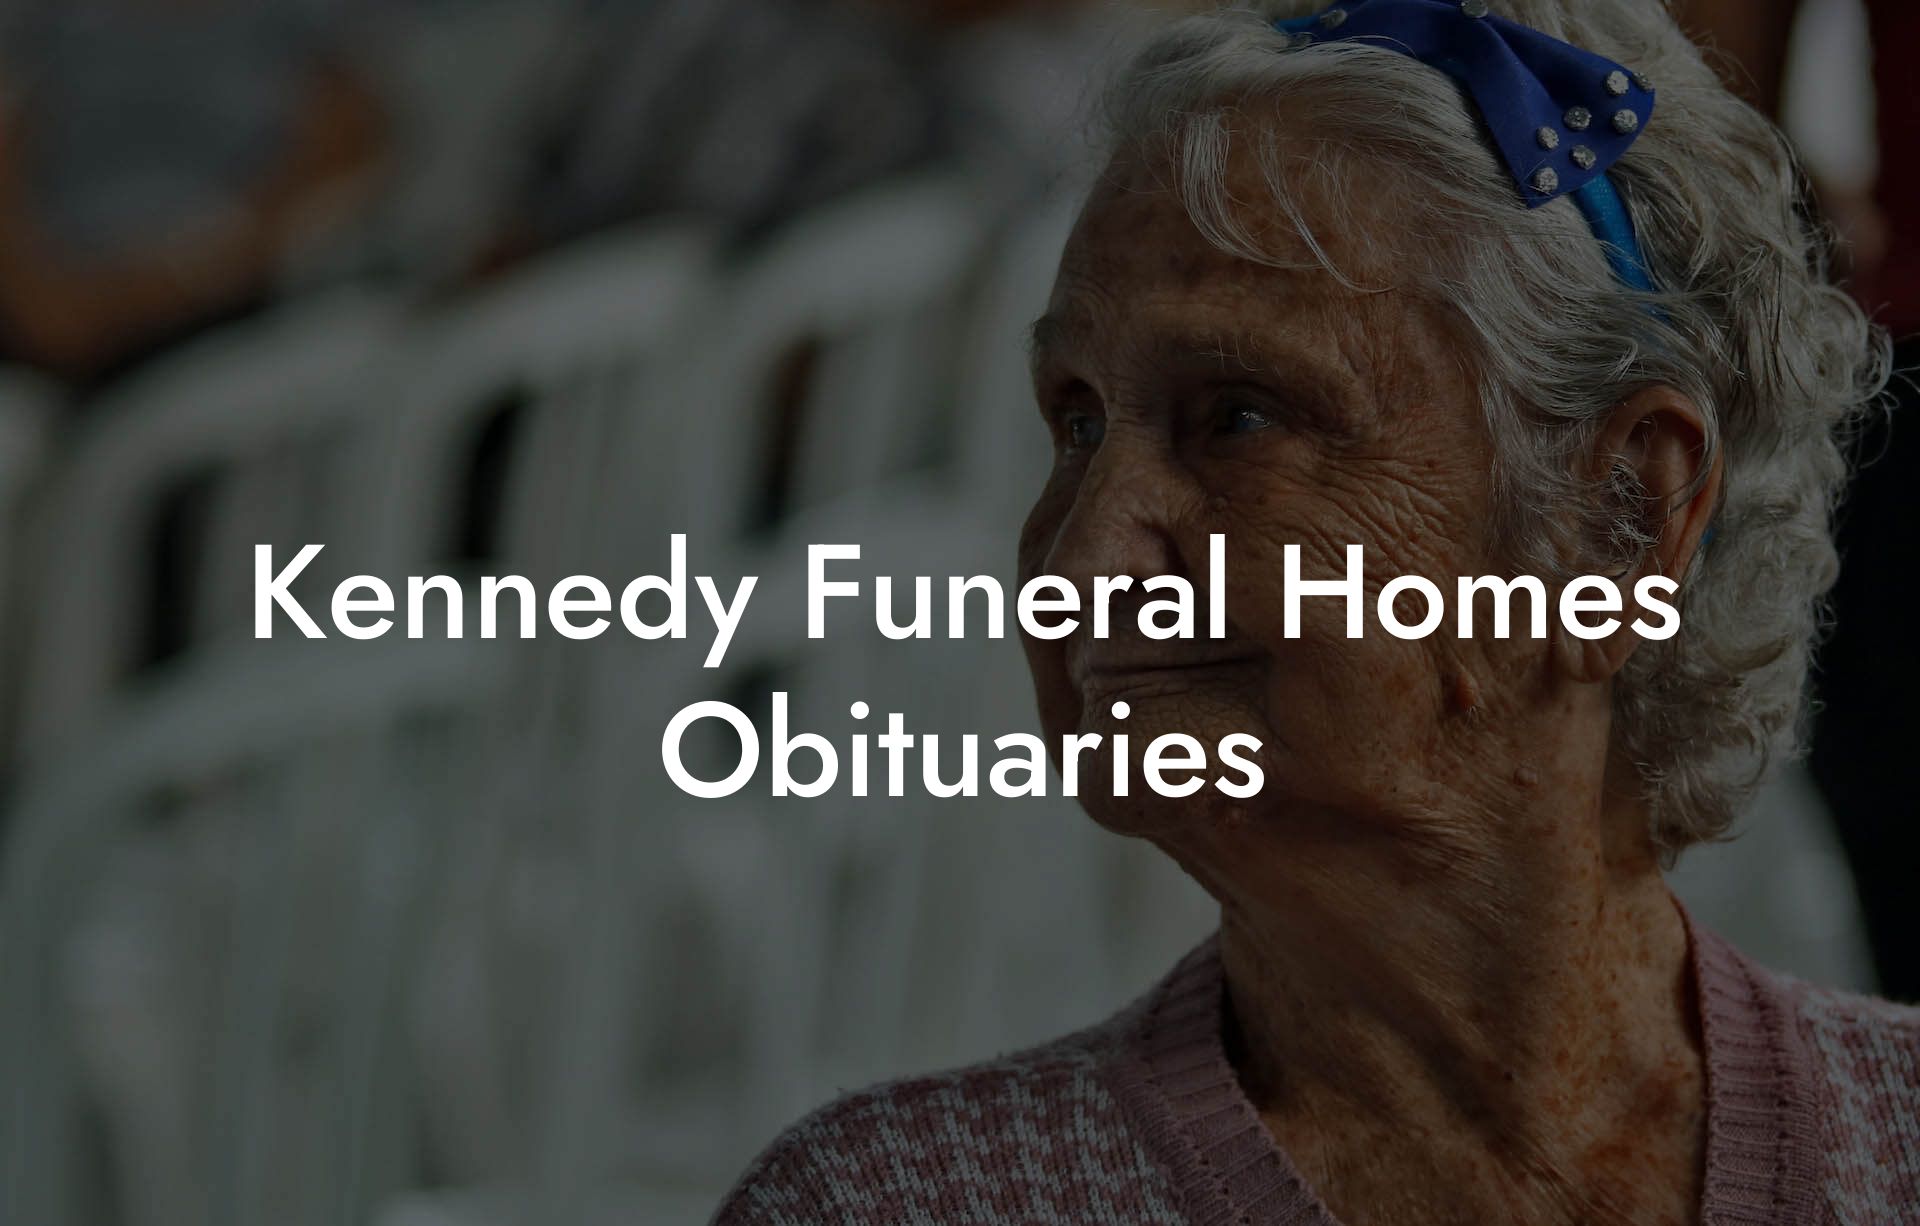 Kennedy Funeral Homes Obituaries